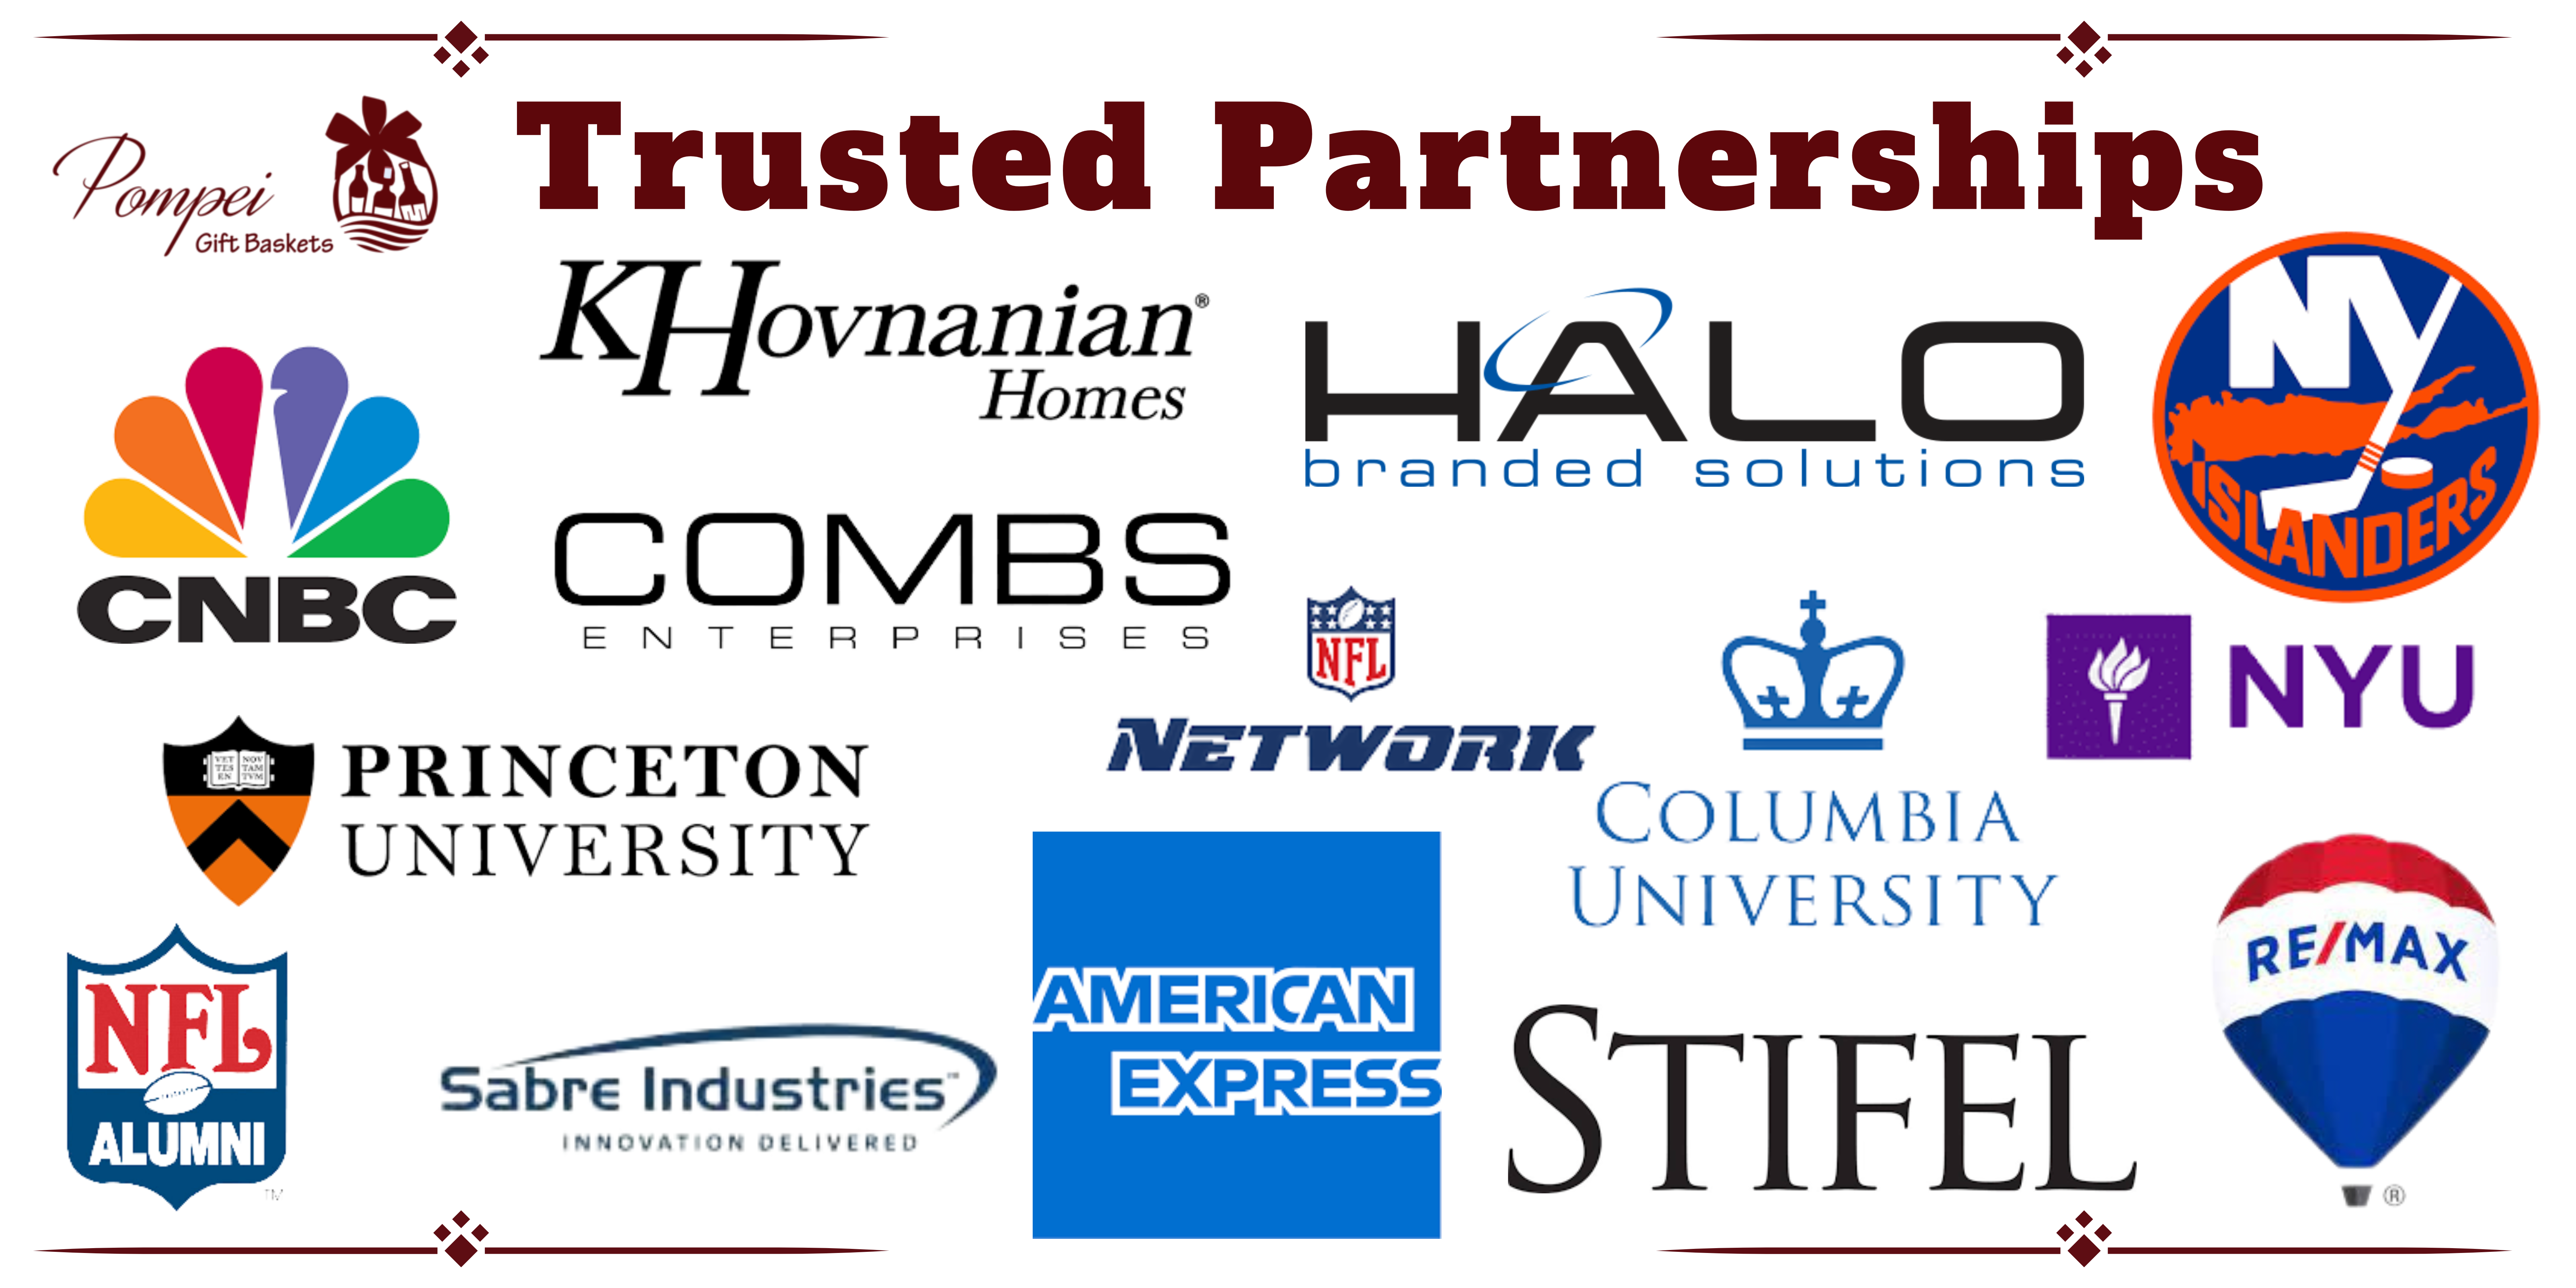 TRUSTED PARTNERSHIPS, KHOVIANIAN HOMES, HALO, NY ISLANDERS, NFL, NYU, REMAX, STIFEL, AMERICAN EXPRESS, CNBC, PRINCETON, SABRE INDUSTRIES, COMBS, COLUMBIA, REAL ESTATE, MARKETING, LIFETIME